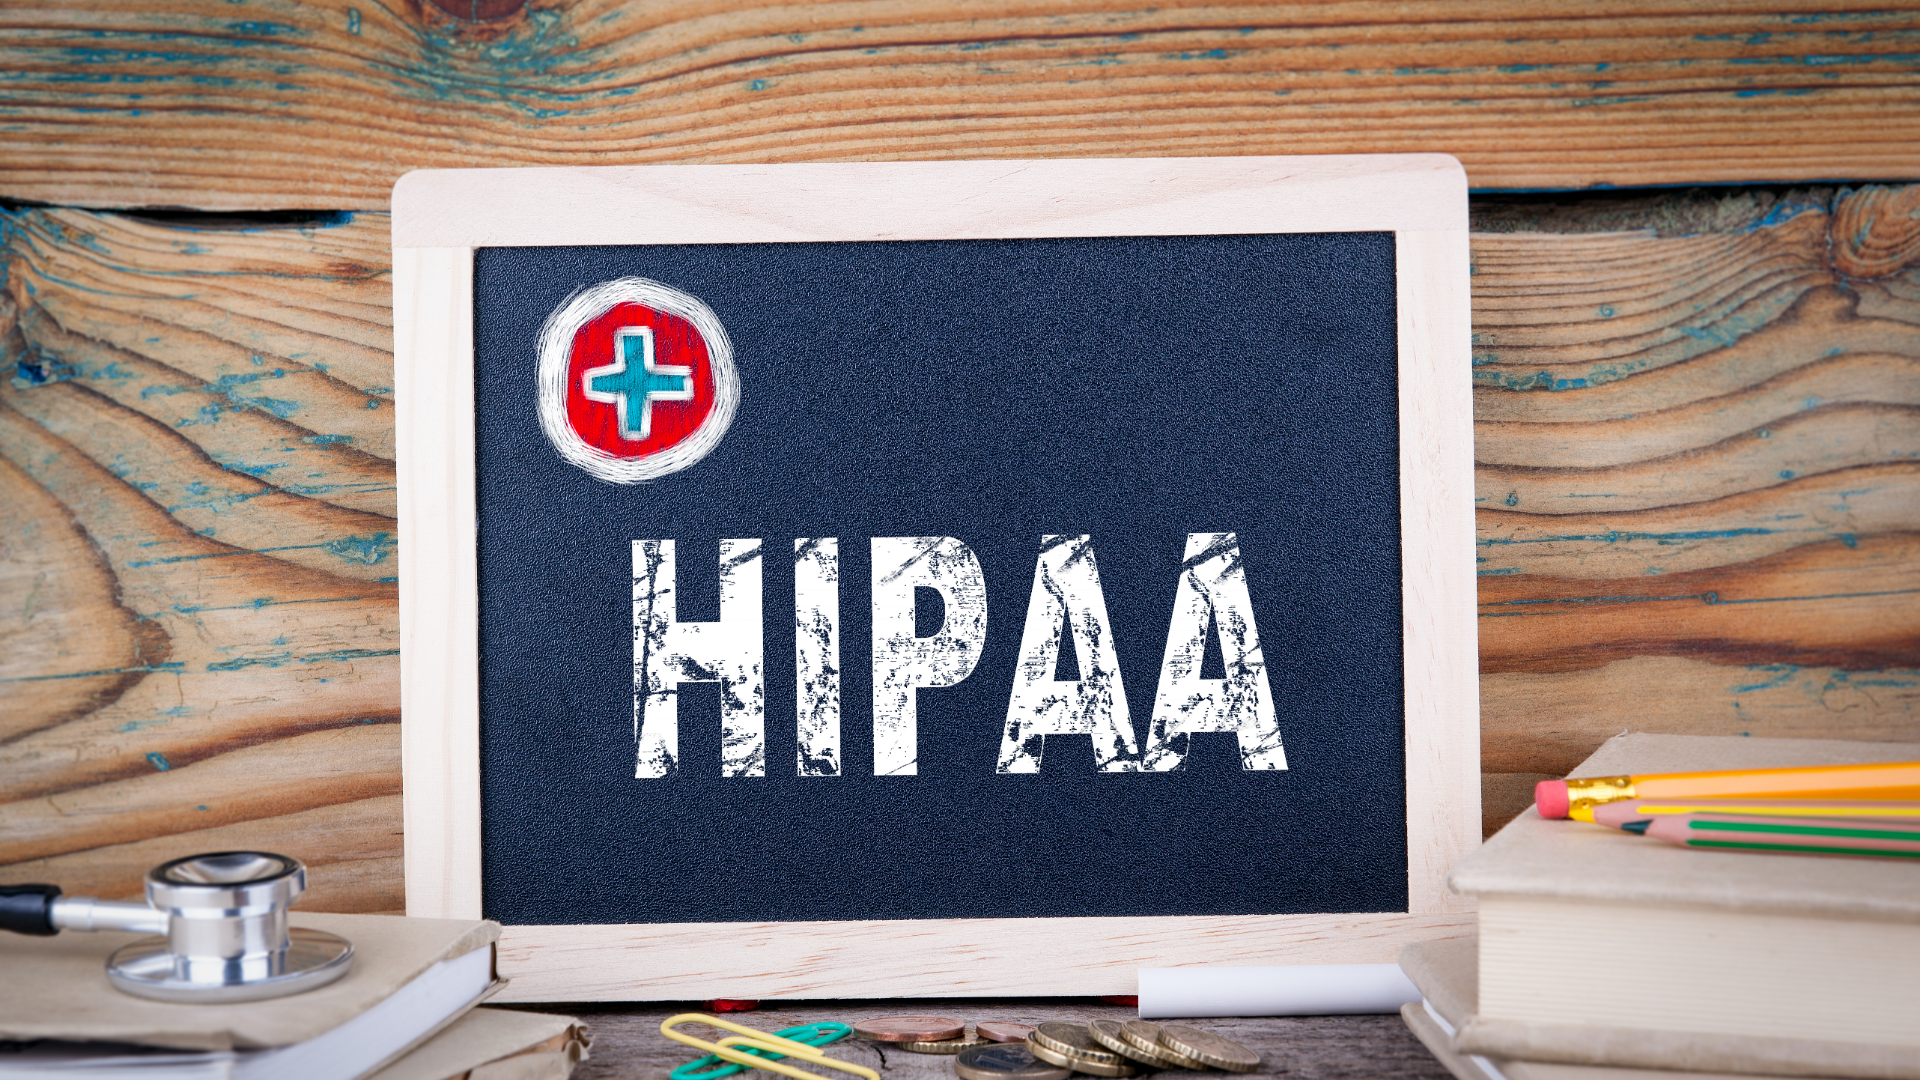 https://www.groundlabs.com/wp-content/uploads/2020/10/HIPAA_what-to-know-blog.png